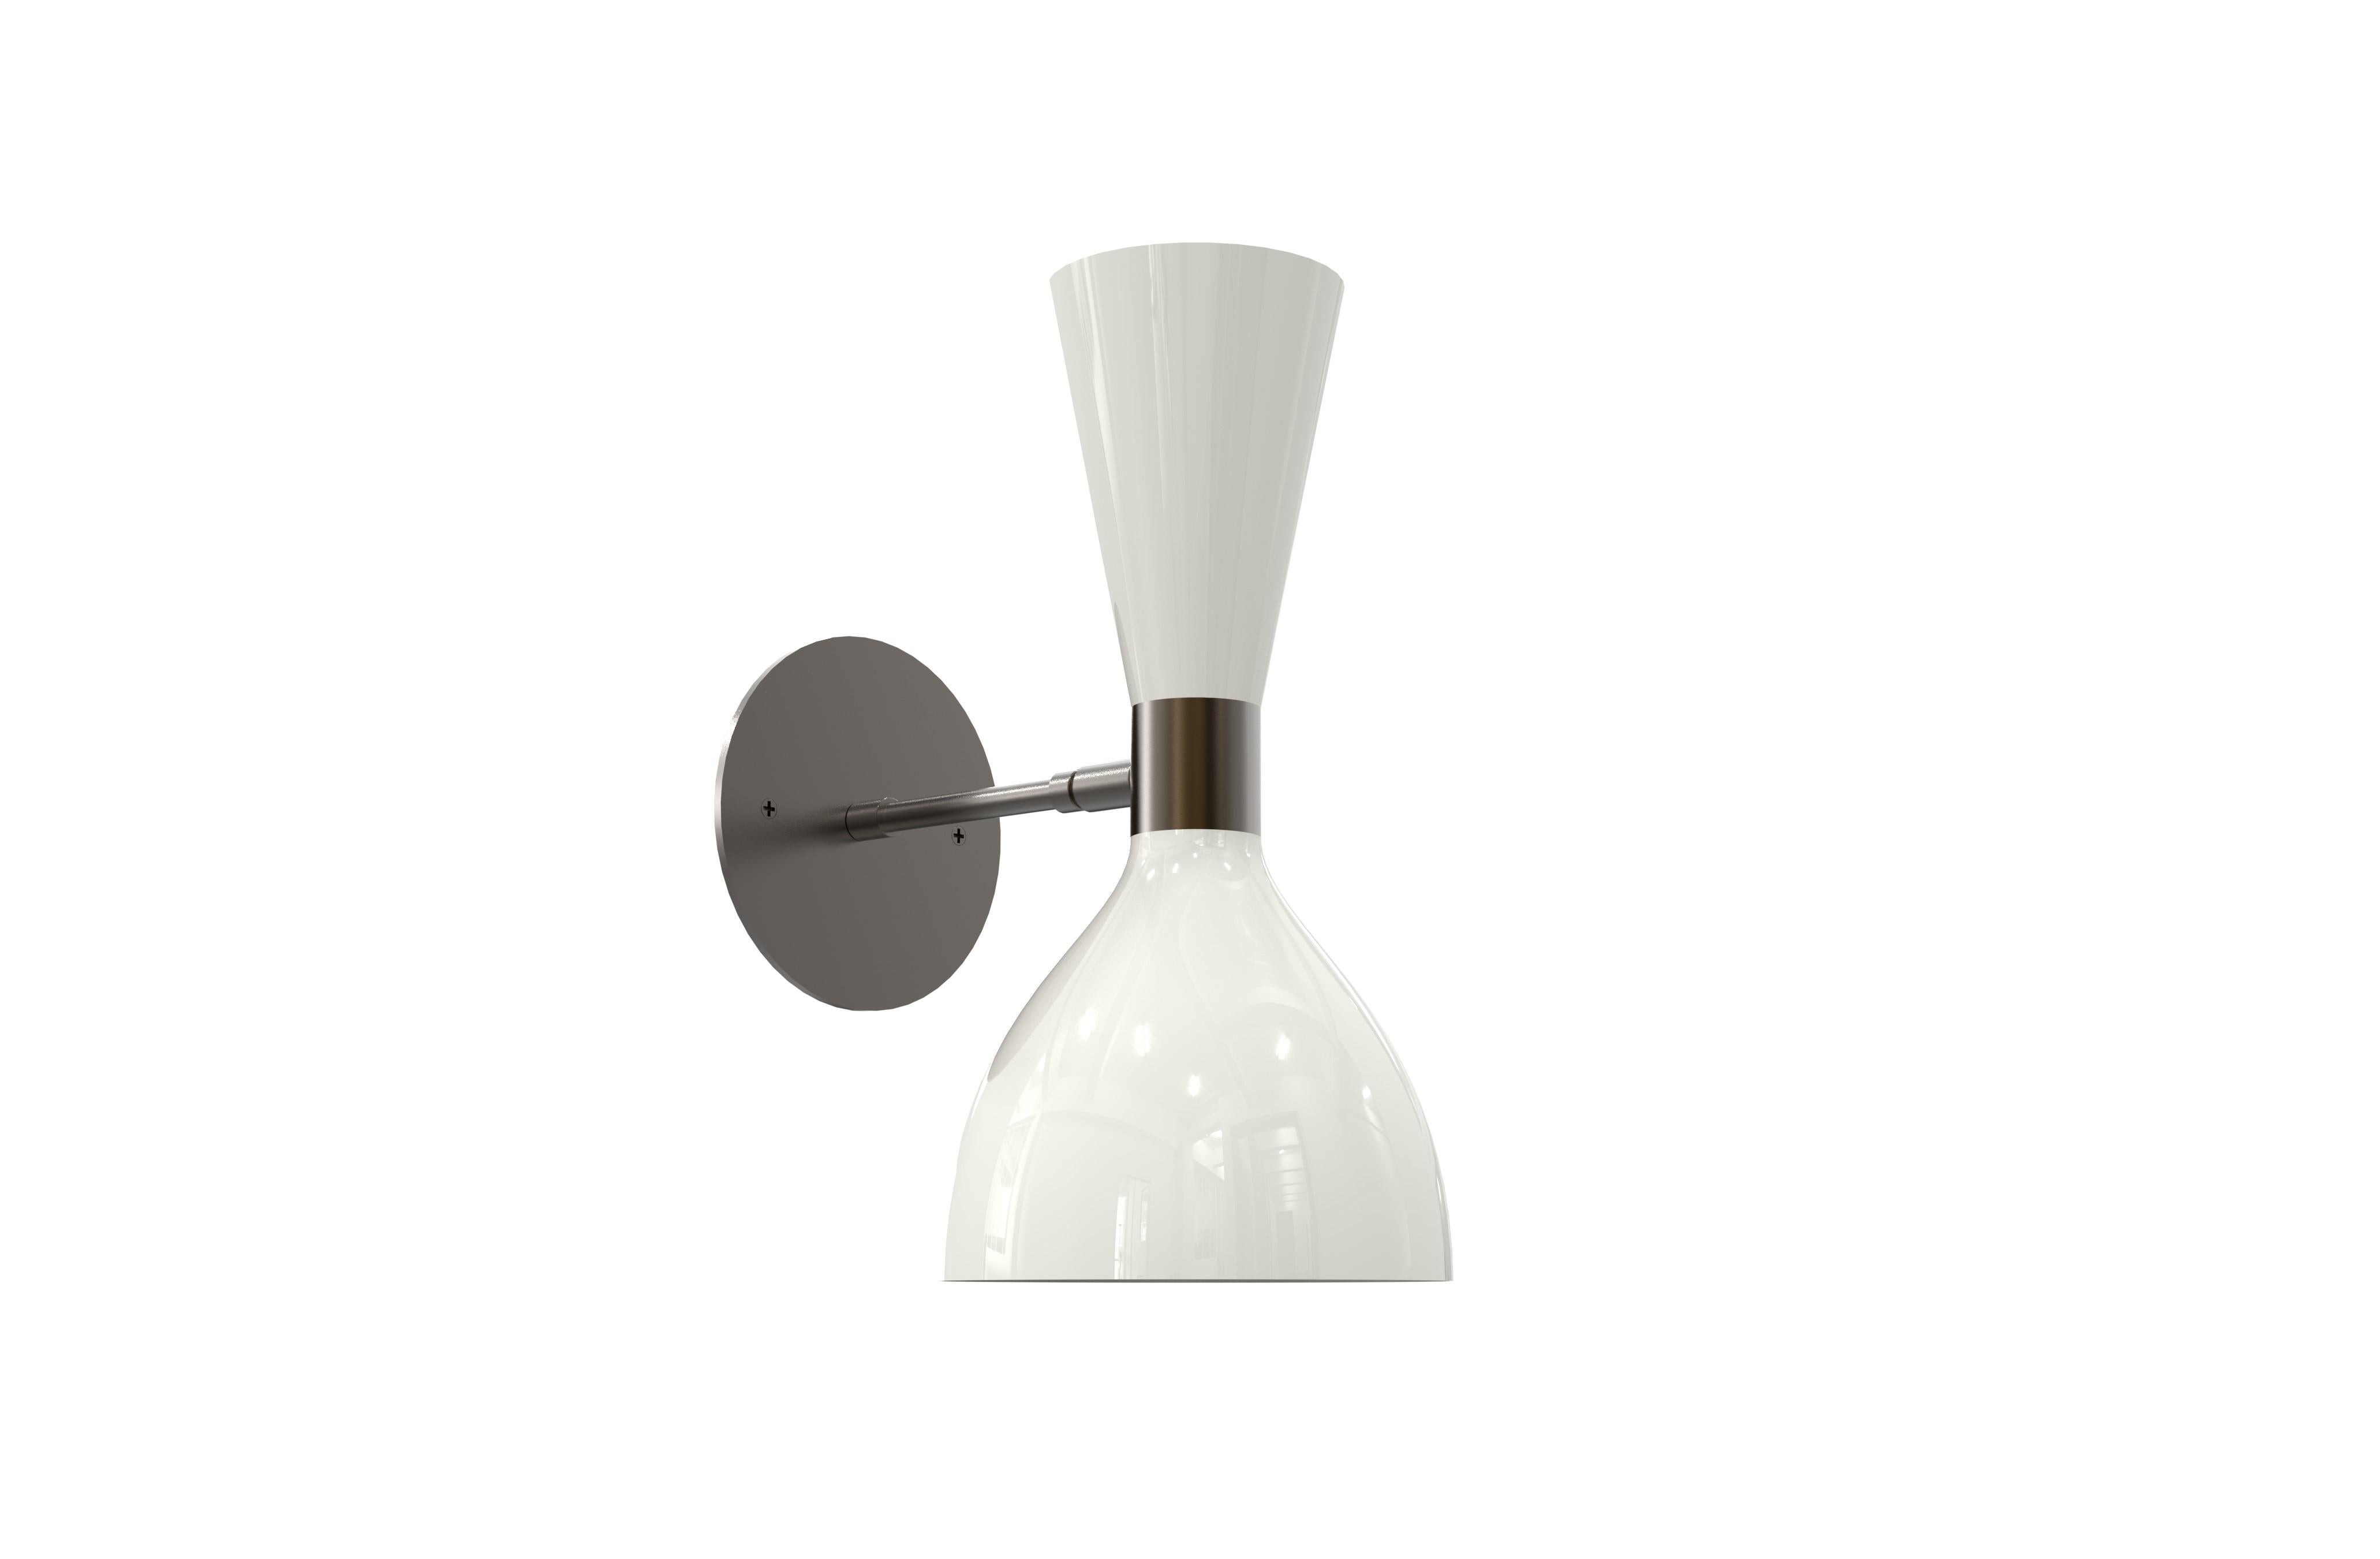 Our best-selling Ludo wall sconce or reading light, handmade by Blueprint Lighting. The spun aluminum cones are a vintage 1950s Italian design. Swiveling head allows for cone adjustment.  You may select from any of our 36 enamel colors and 6 metal